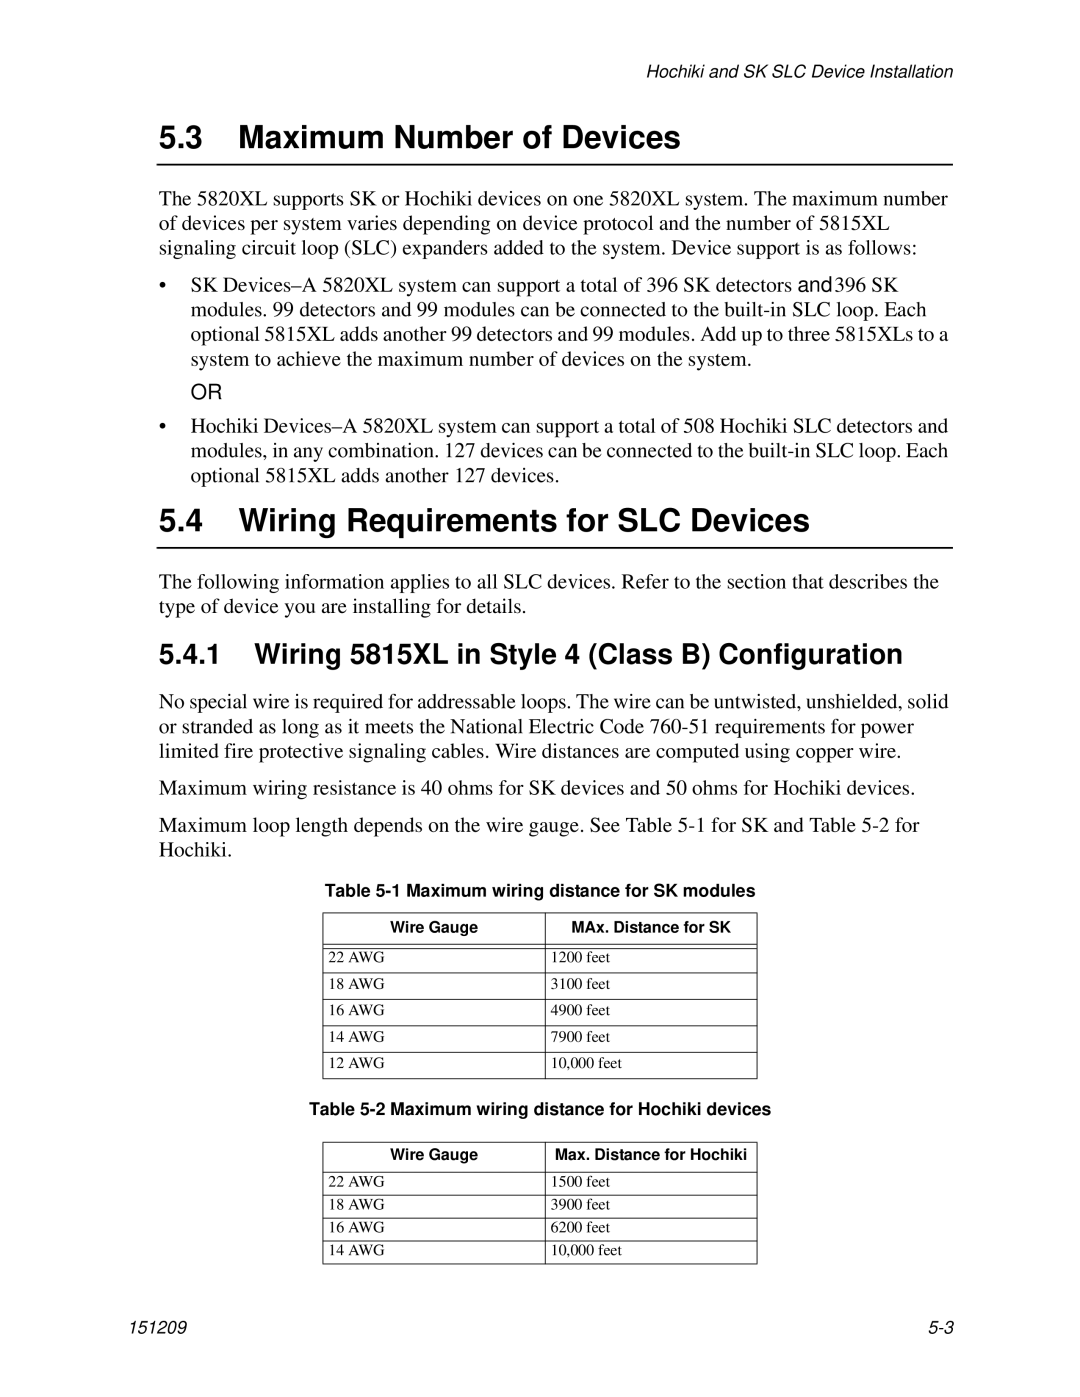 Honeywell 5820XL Maximum Number of Devices, Wiring Requirements for SLC Devices, Maximum wiring distance for SK modules 